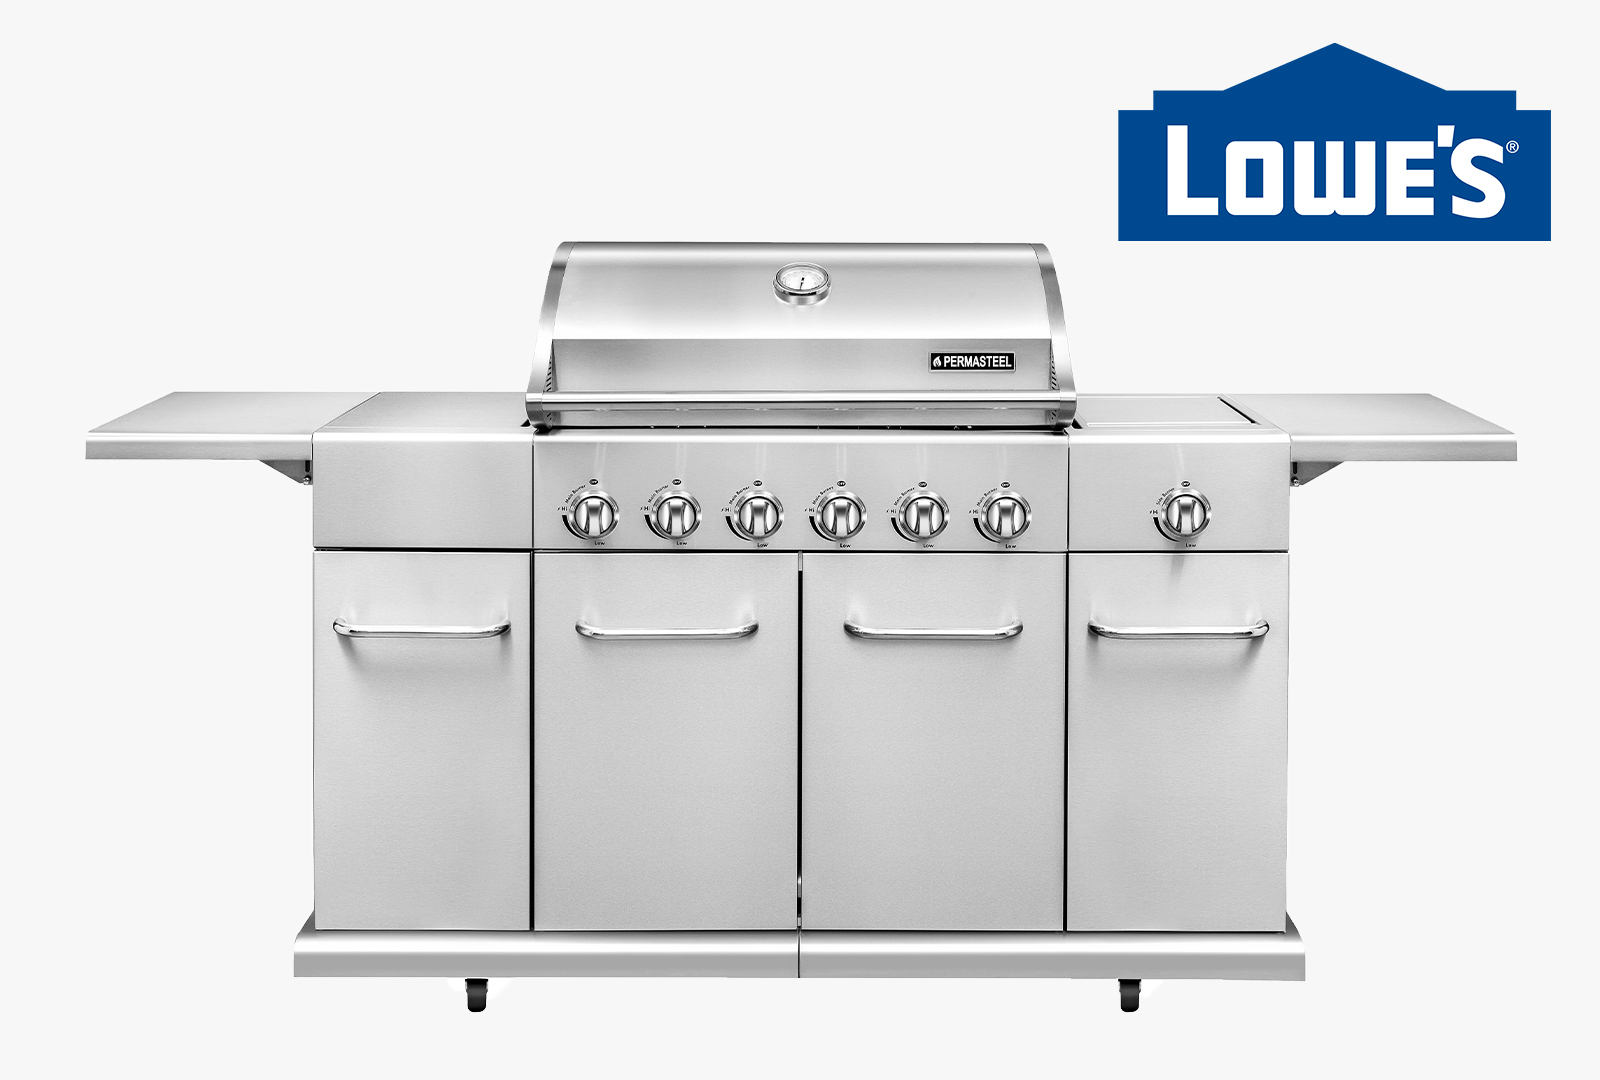 Permasteel 6-Burner Gas Grill Receives "Recommended Buy" at Lowe's